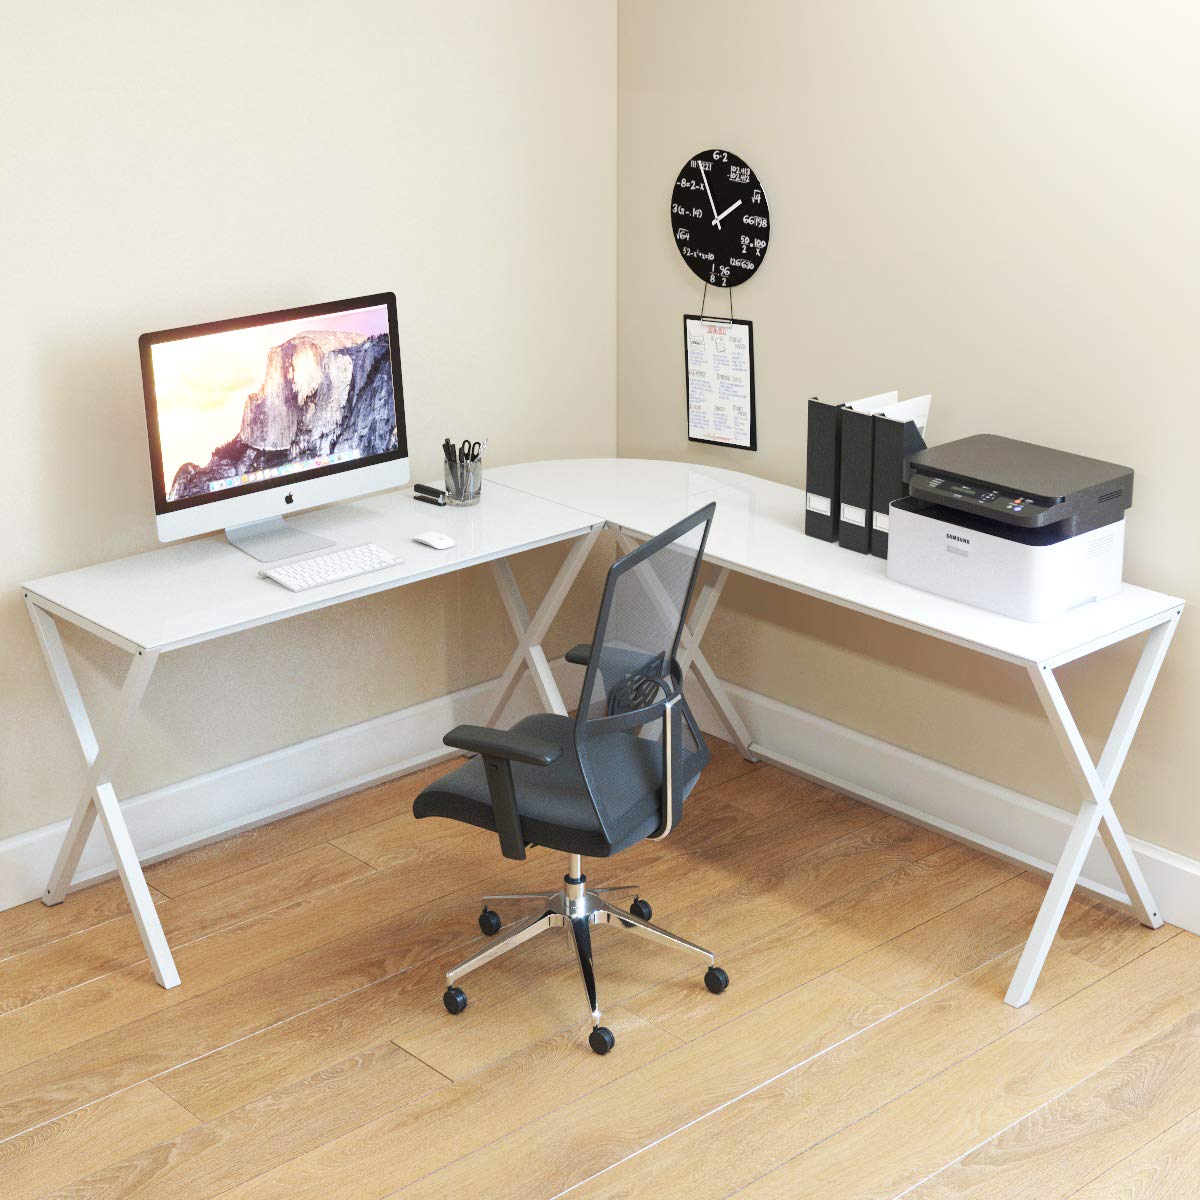 Ryan Rove Keeling 3 Piece L Shaped Computer Desk - Home and Office Corner Organizer with Side Table and Keyboard Tray - Laptop